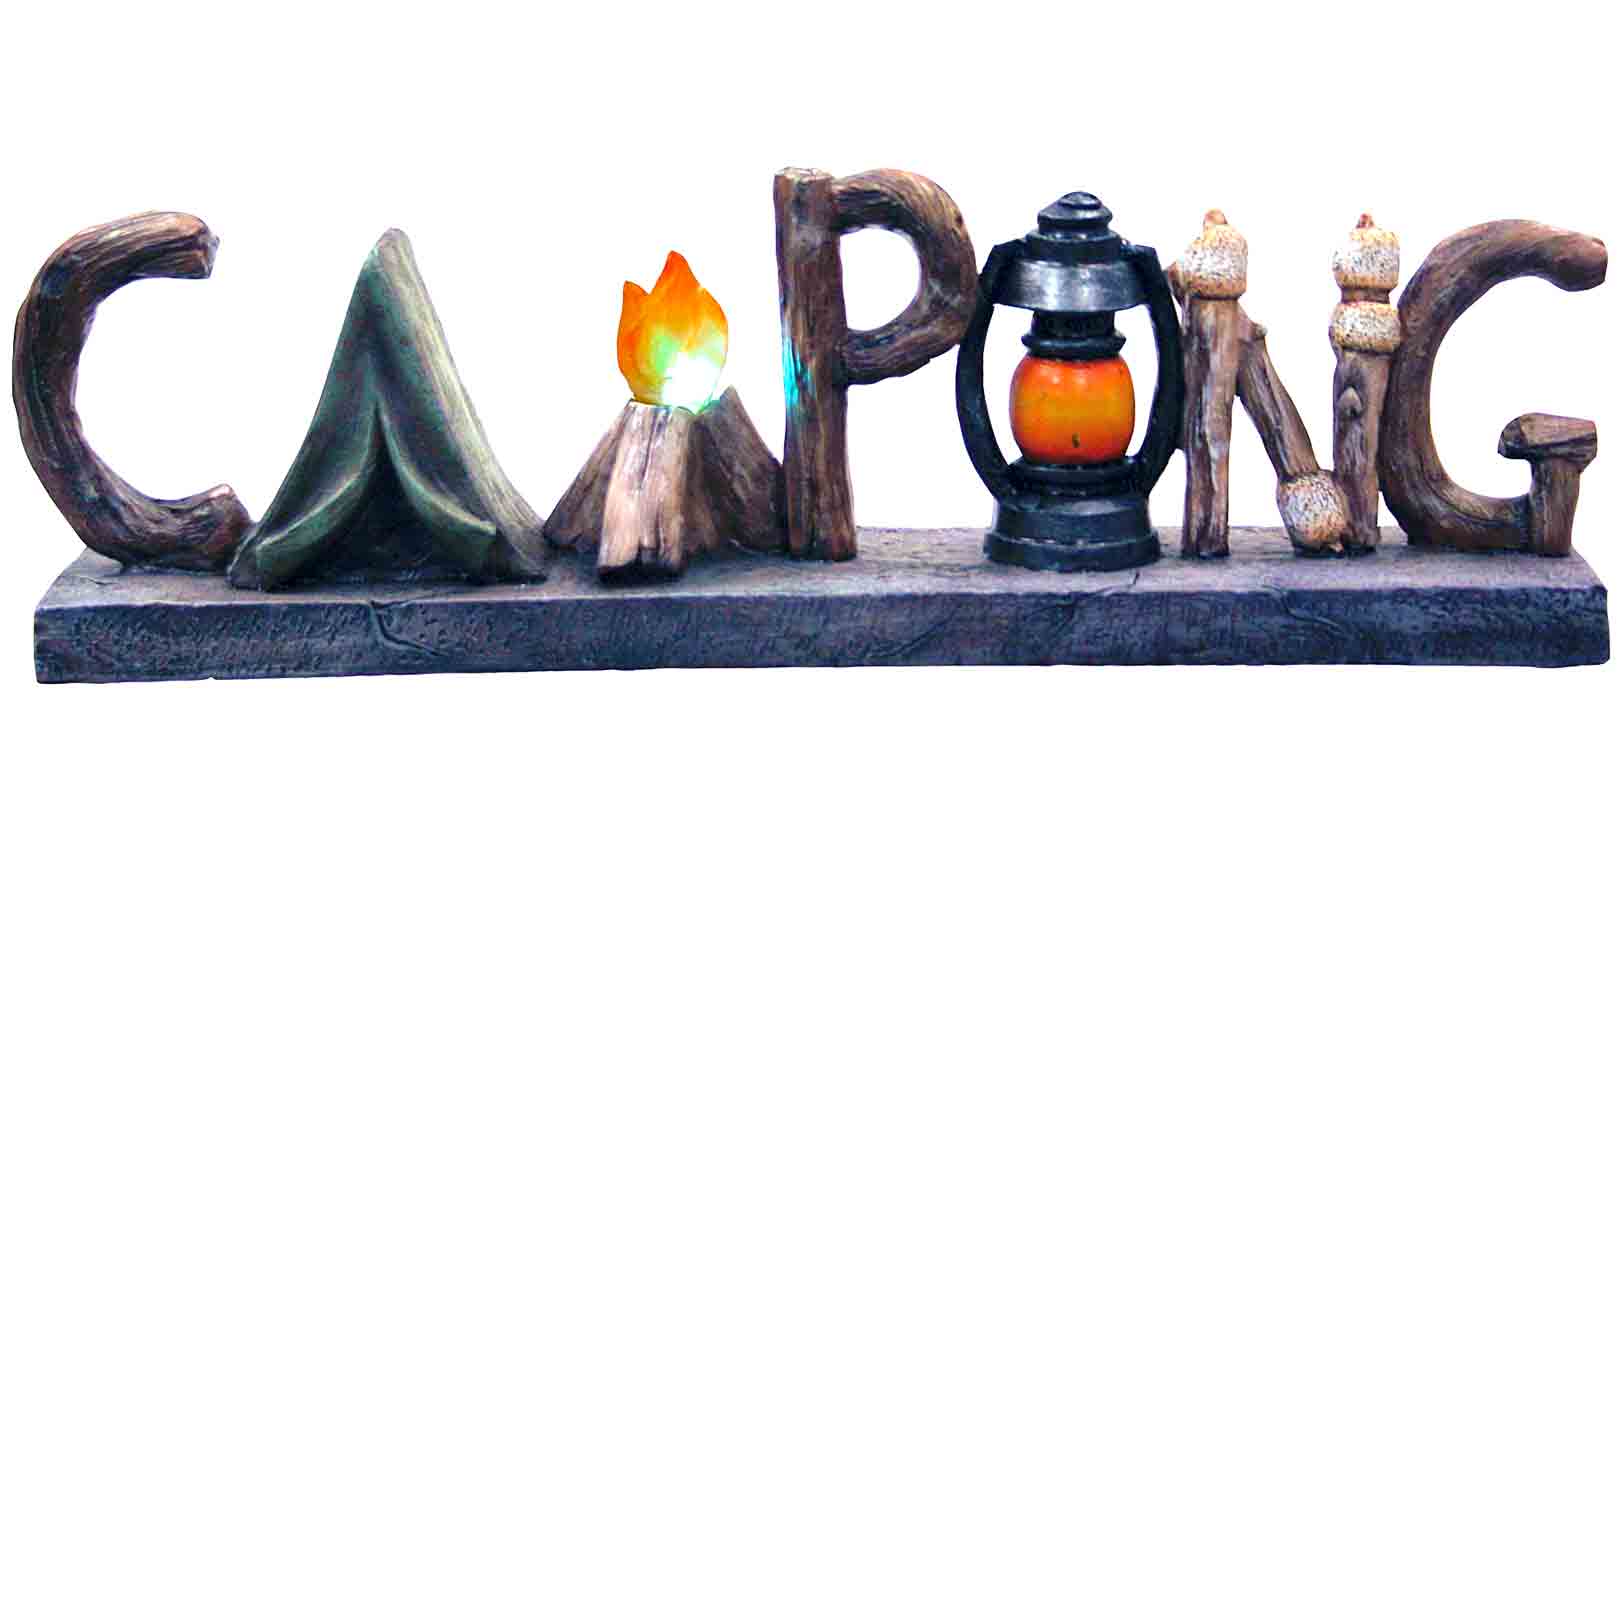 CAMPING WORD W/ LOGS AND LIGHT